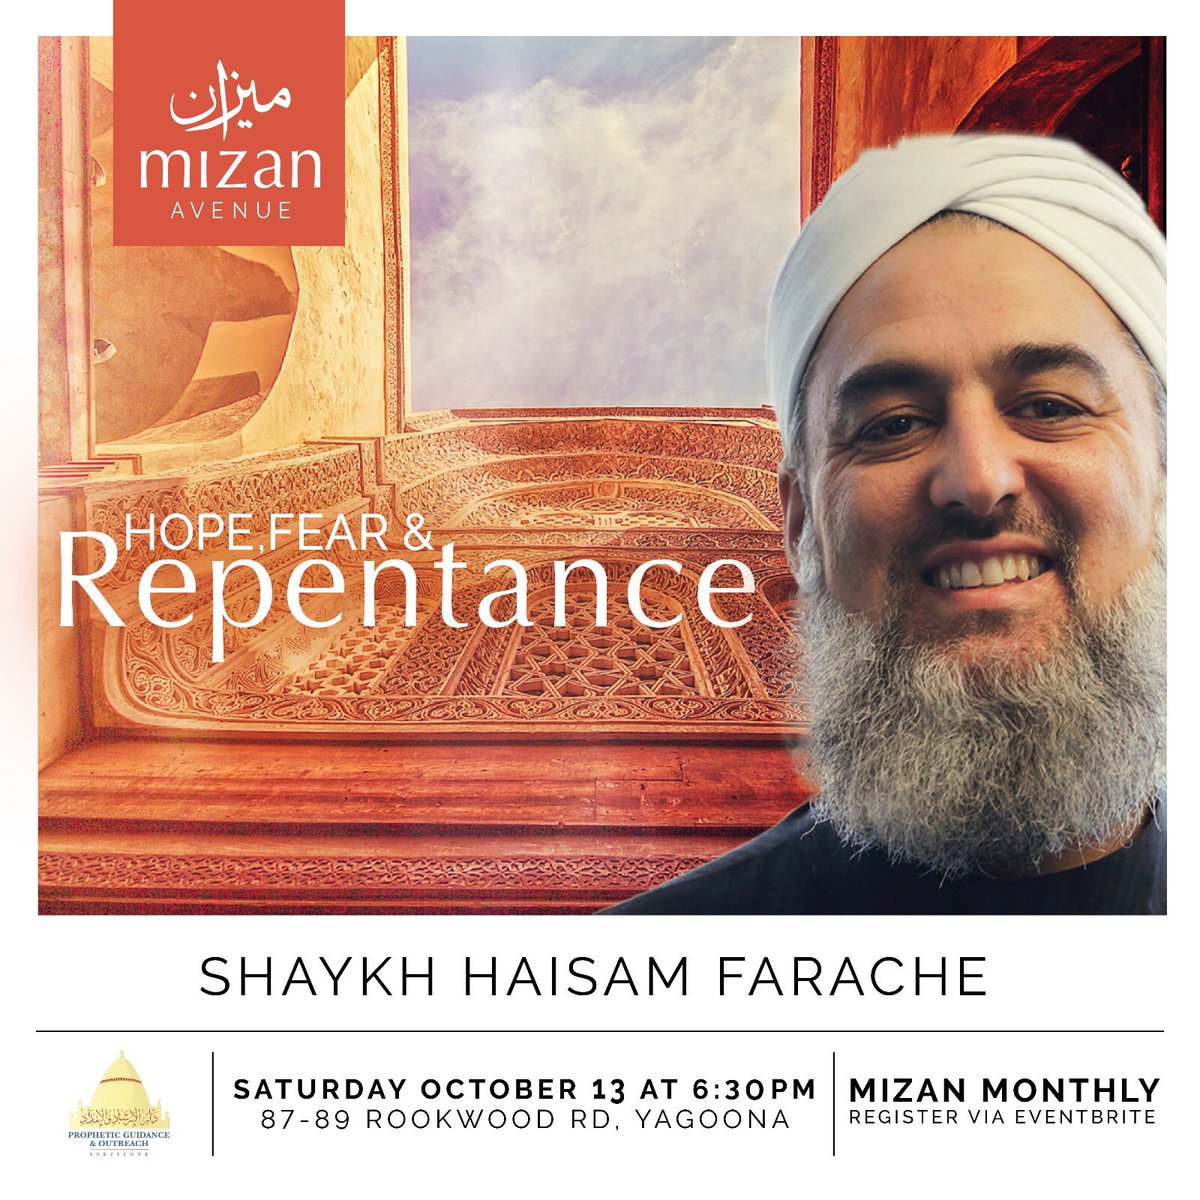 Jumuah mubarakah! We're excited to announce our local Lawyer Shaykh - who has a love for surfing and studied in Tarim 🏄 - will be presenting at October's Mīzān Monthly. mizan-october.eventbrite.com.au #mizan #deen #repentance #fearandhope #Allah